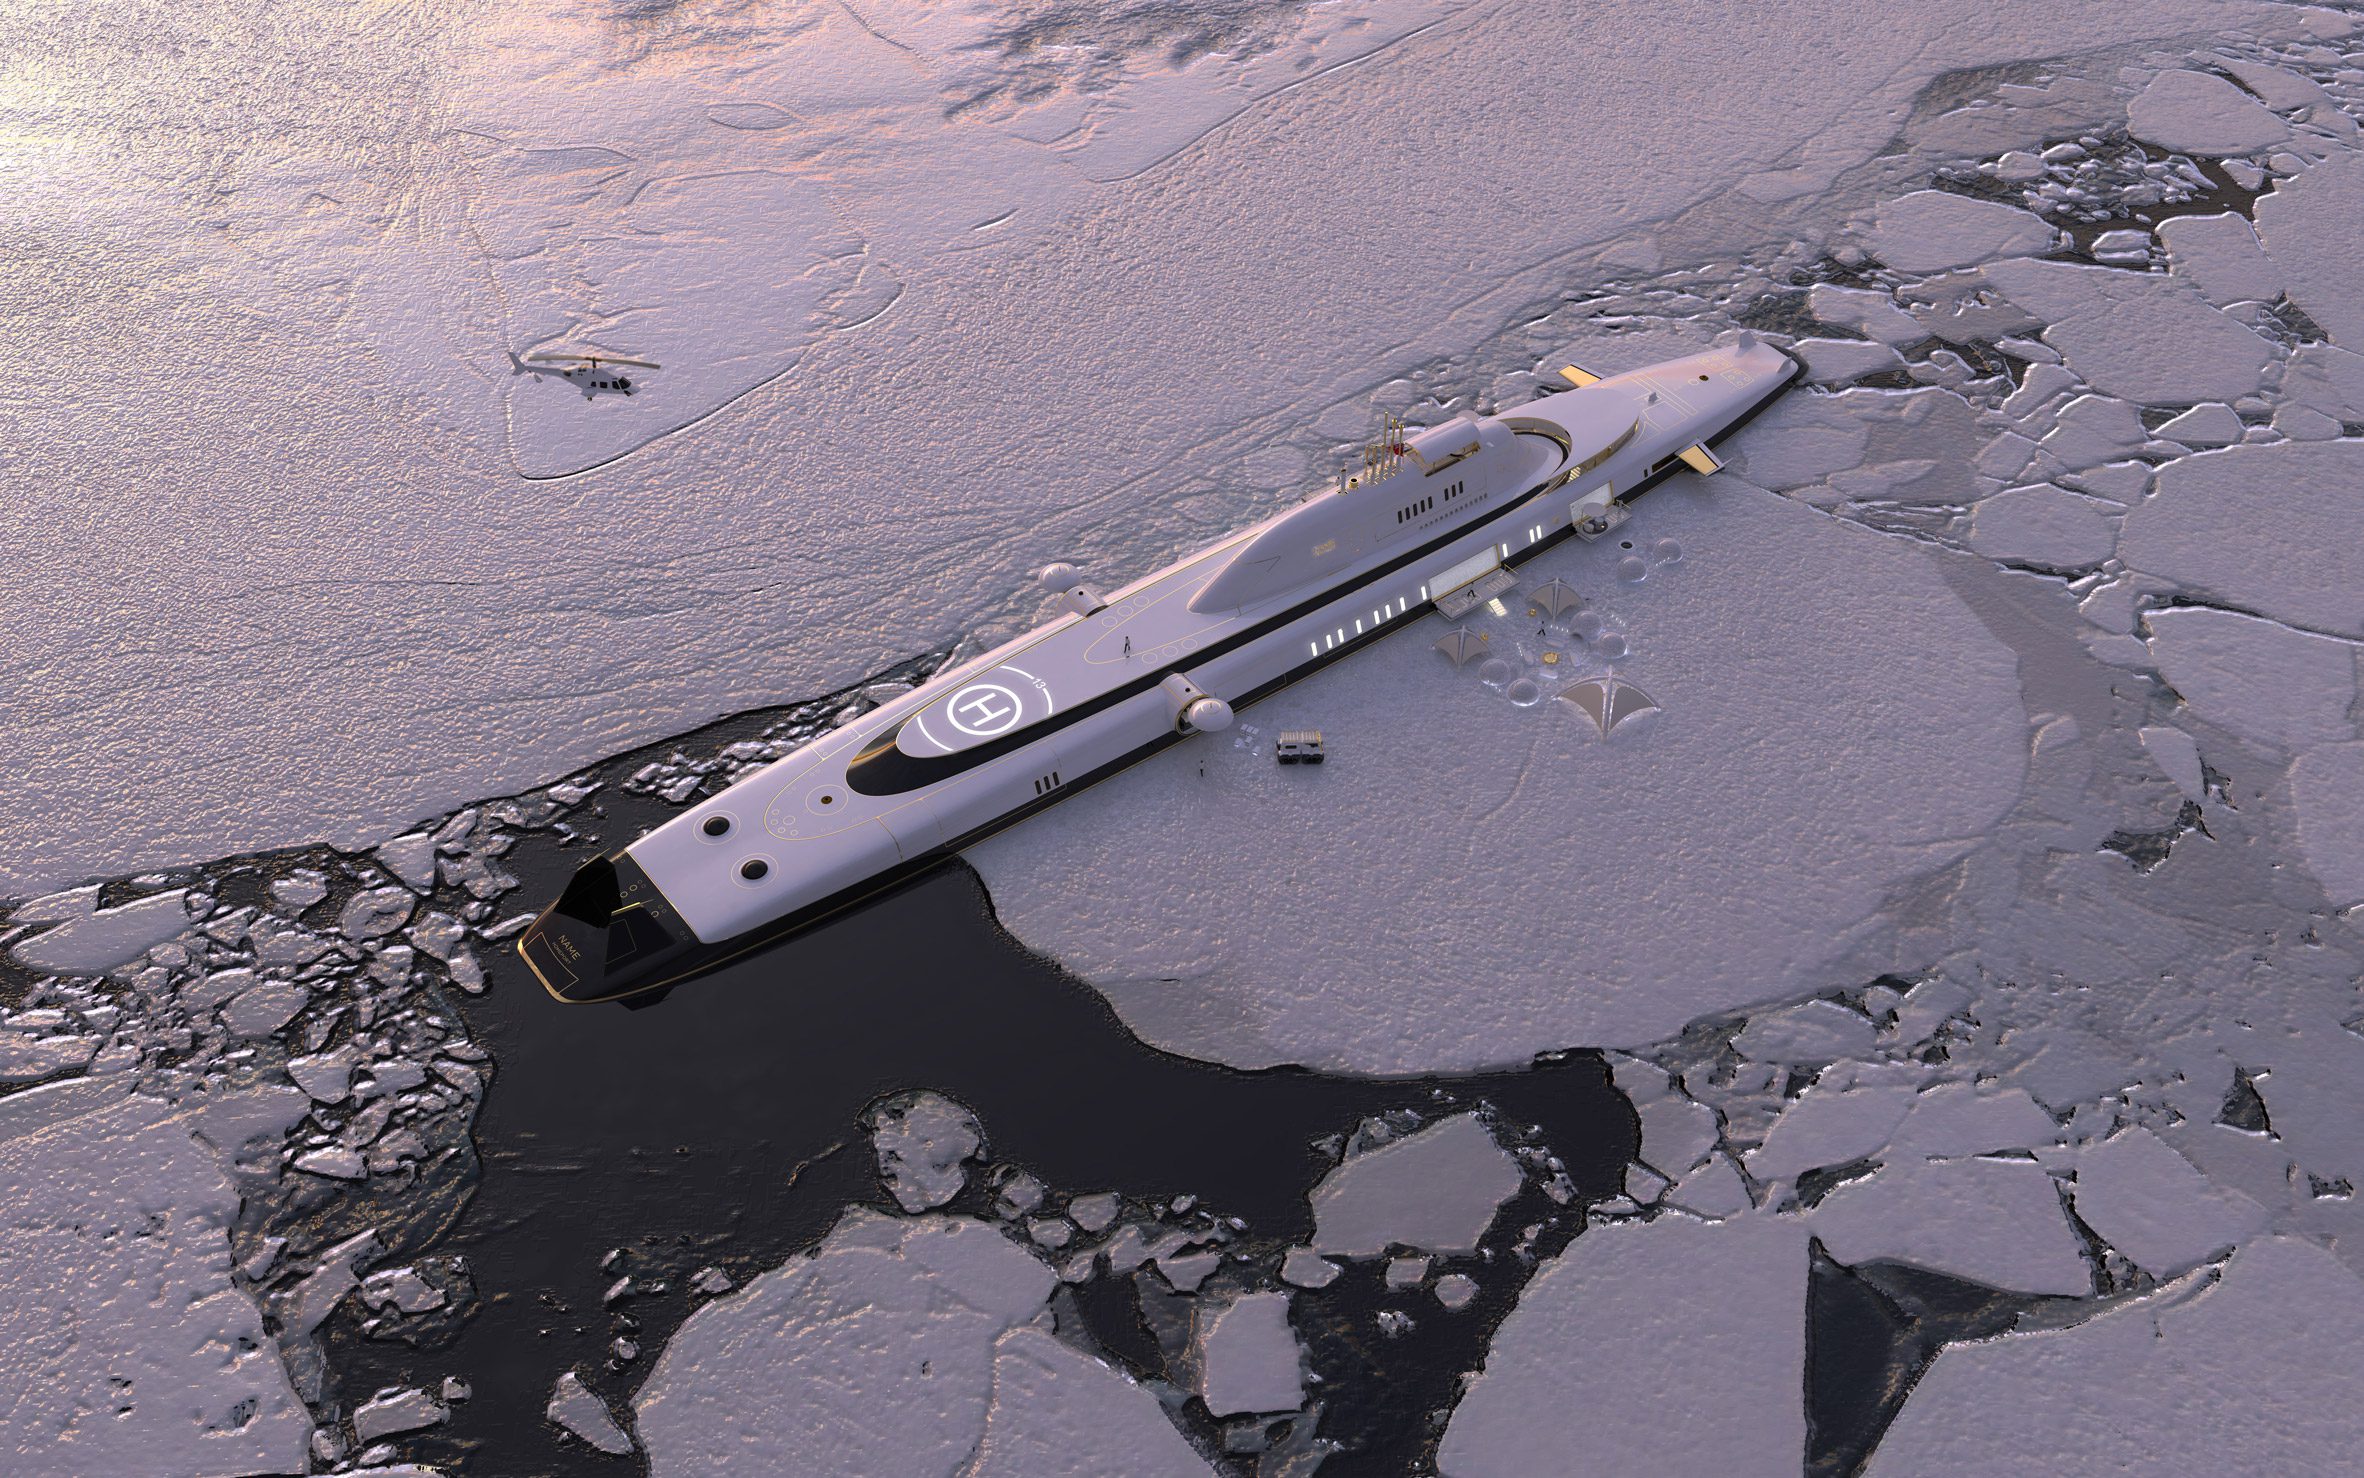 Render of Migaloo M5 submersible superyacht in a sheet of ice